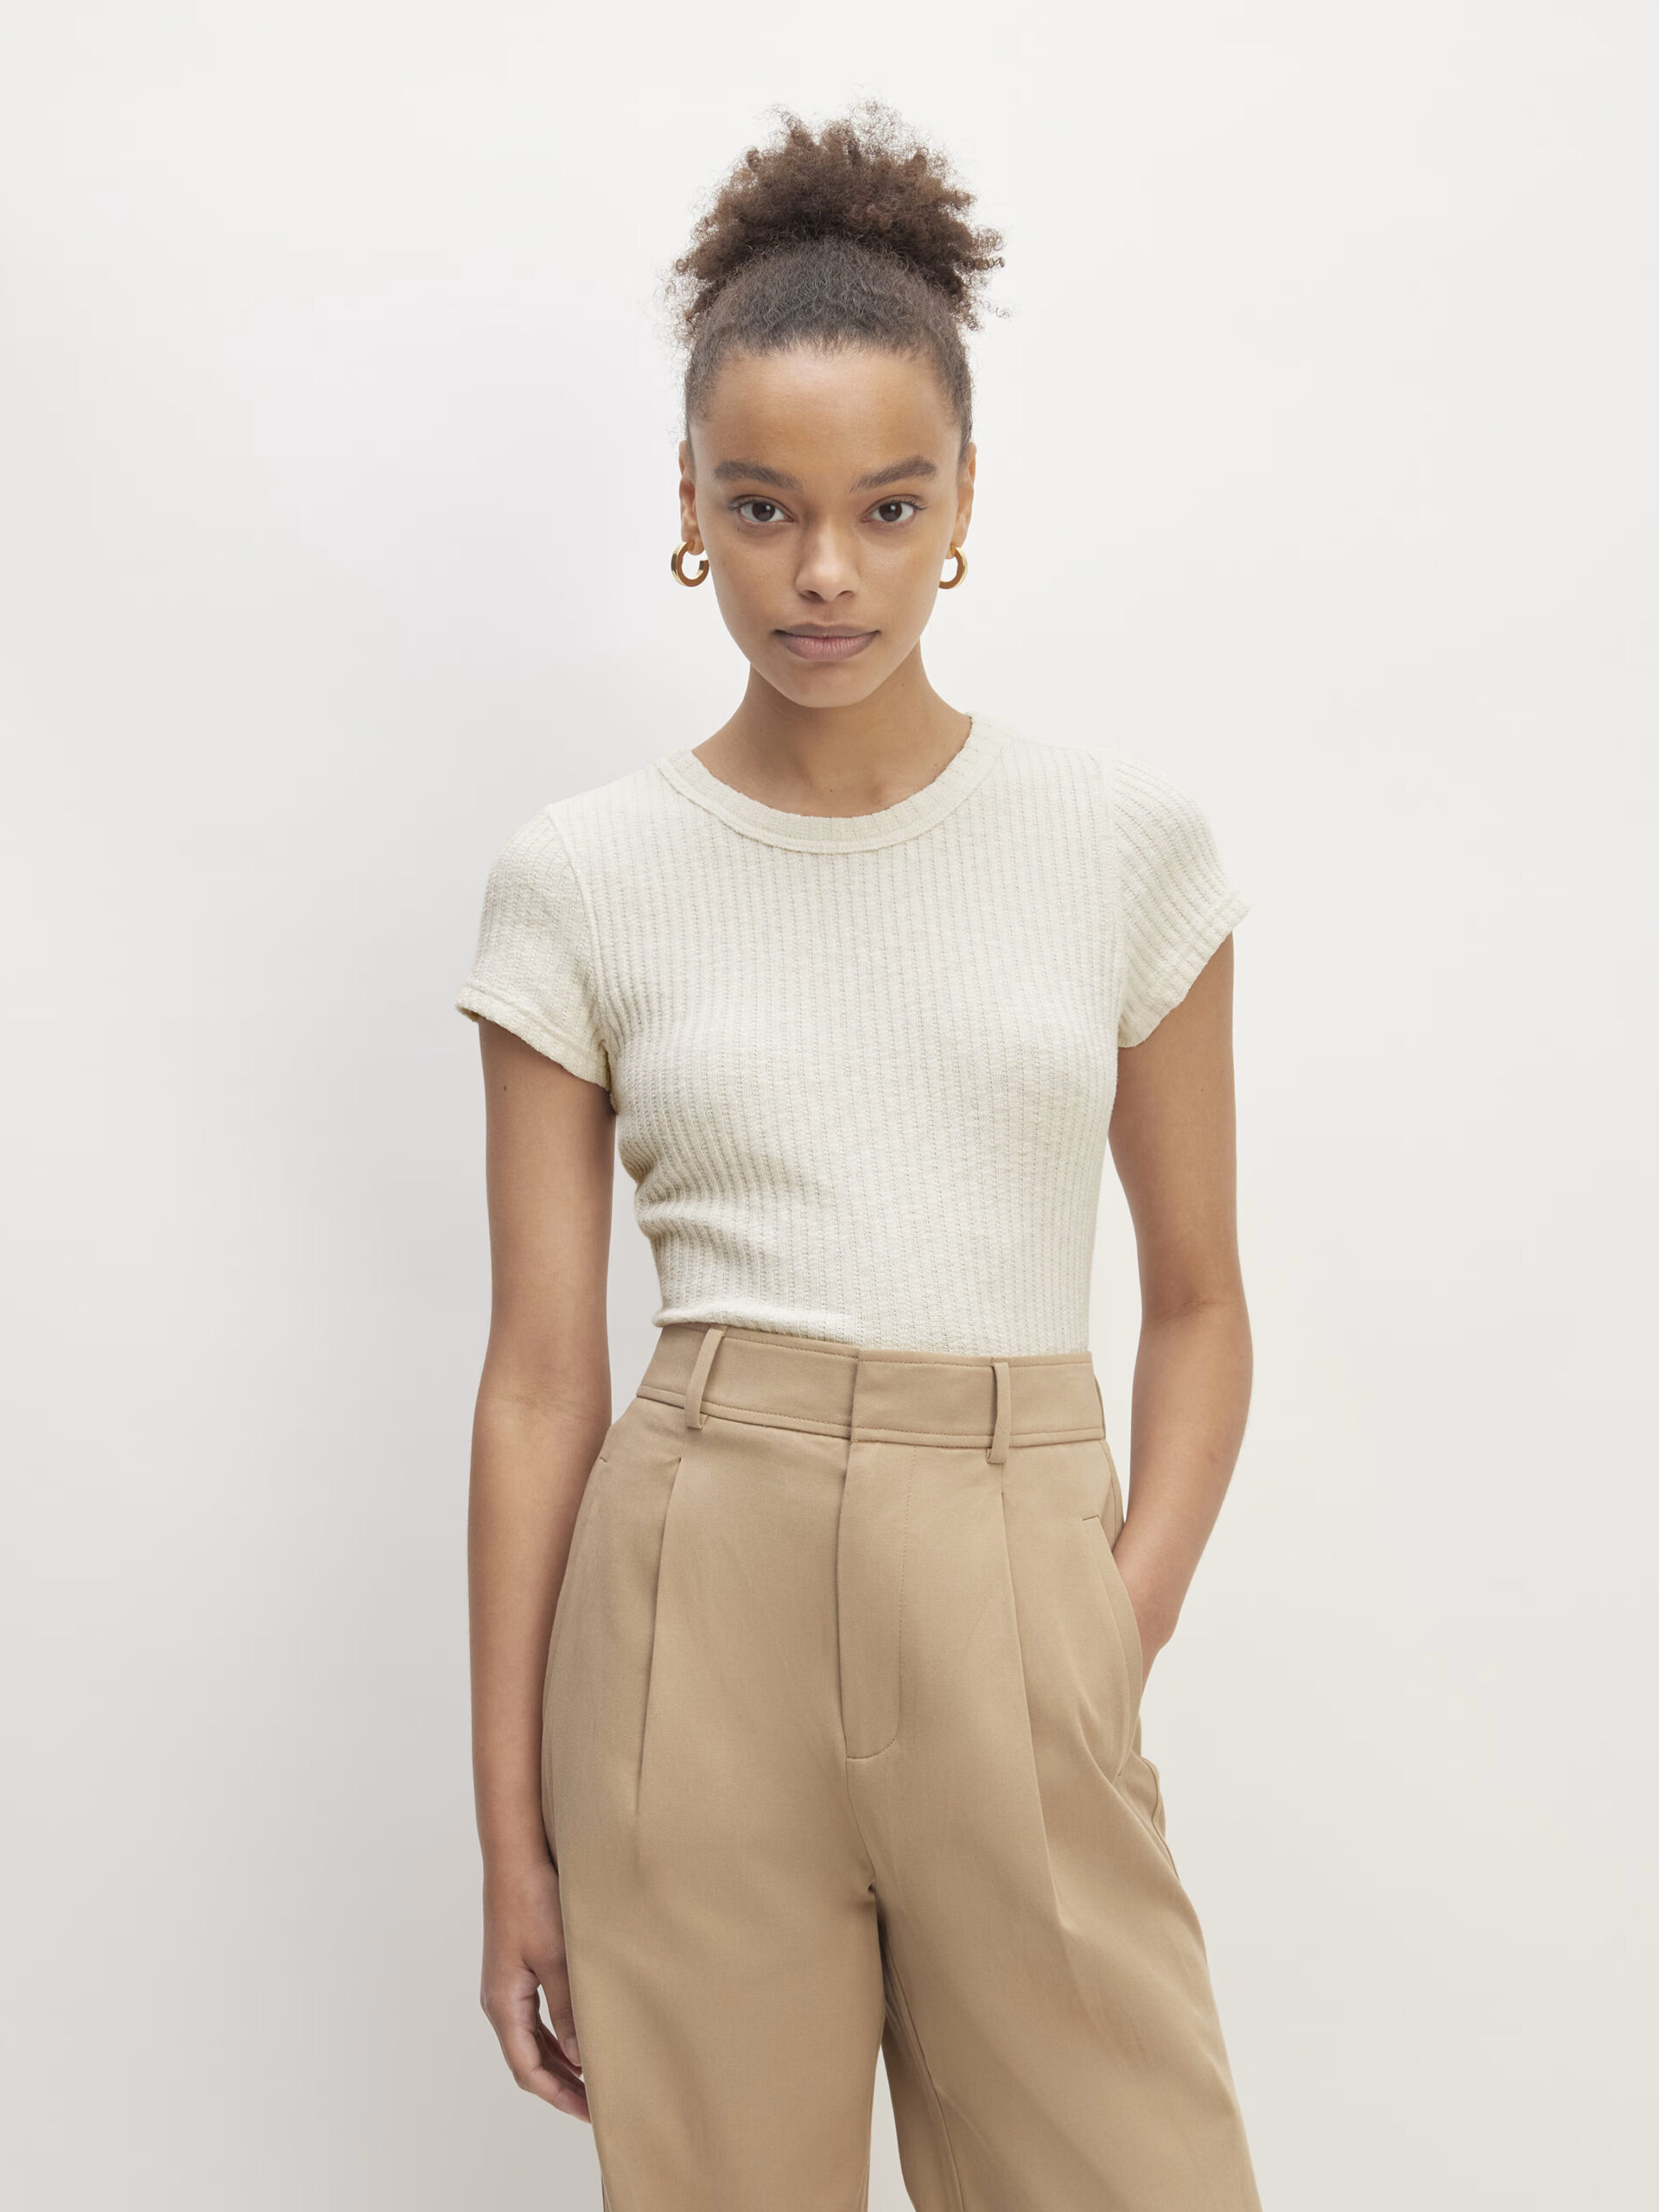 The model is wearing beige trousers and a white t - shirt.